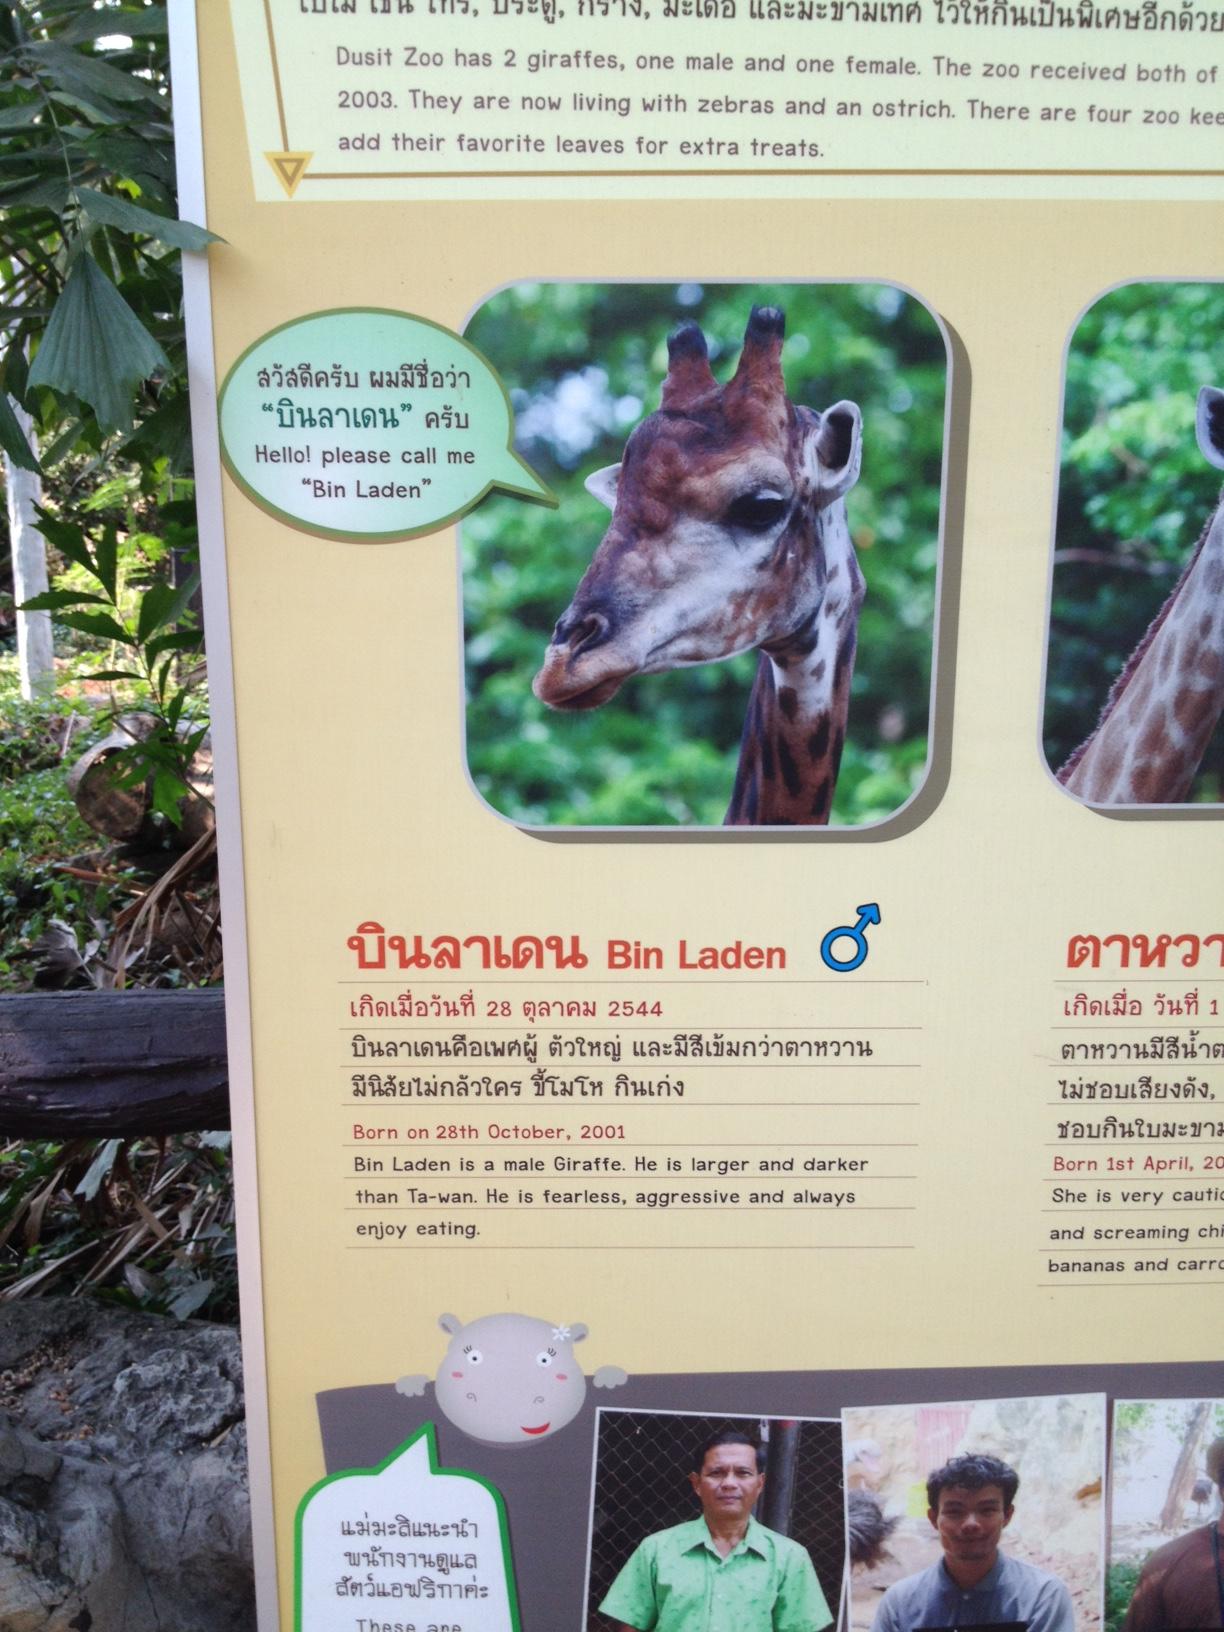 In late 2001 a giraffe was born at Bangkok Zoo. Want to guess what it was named?